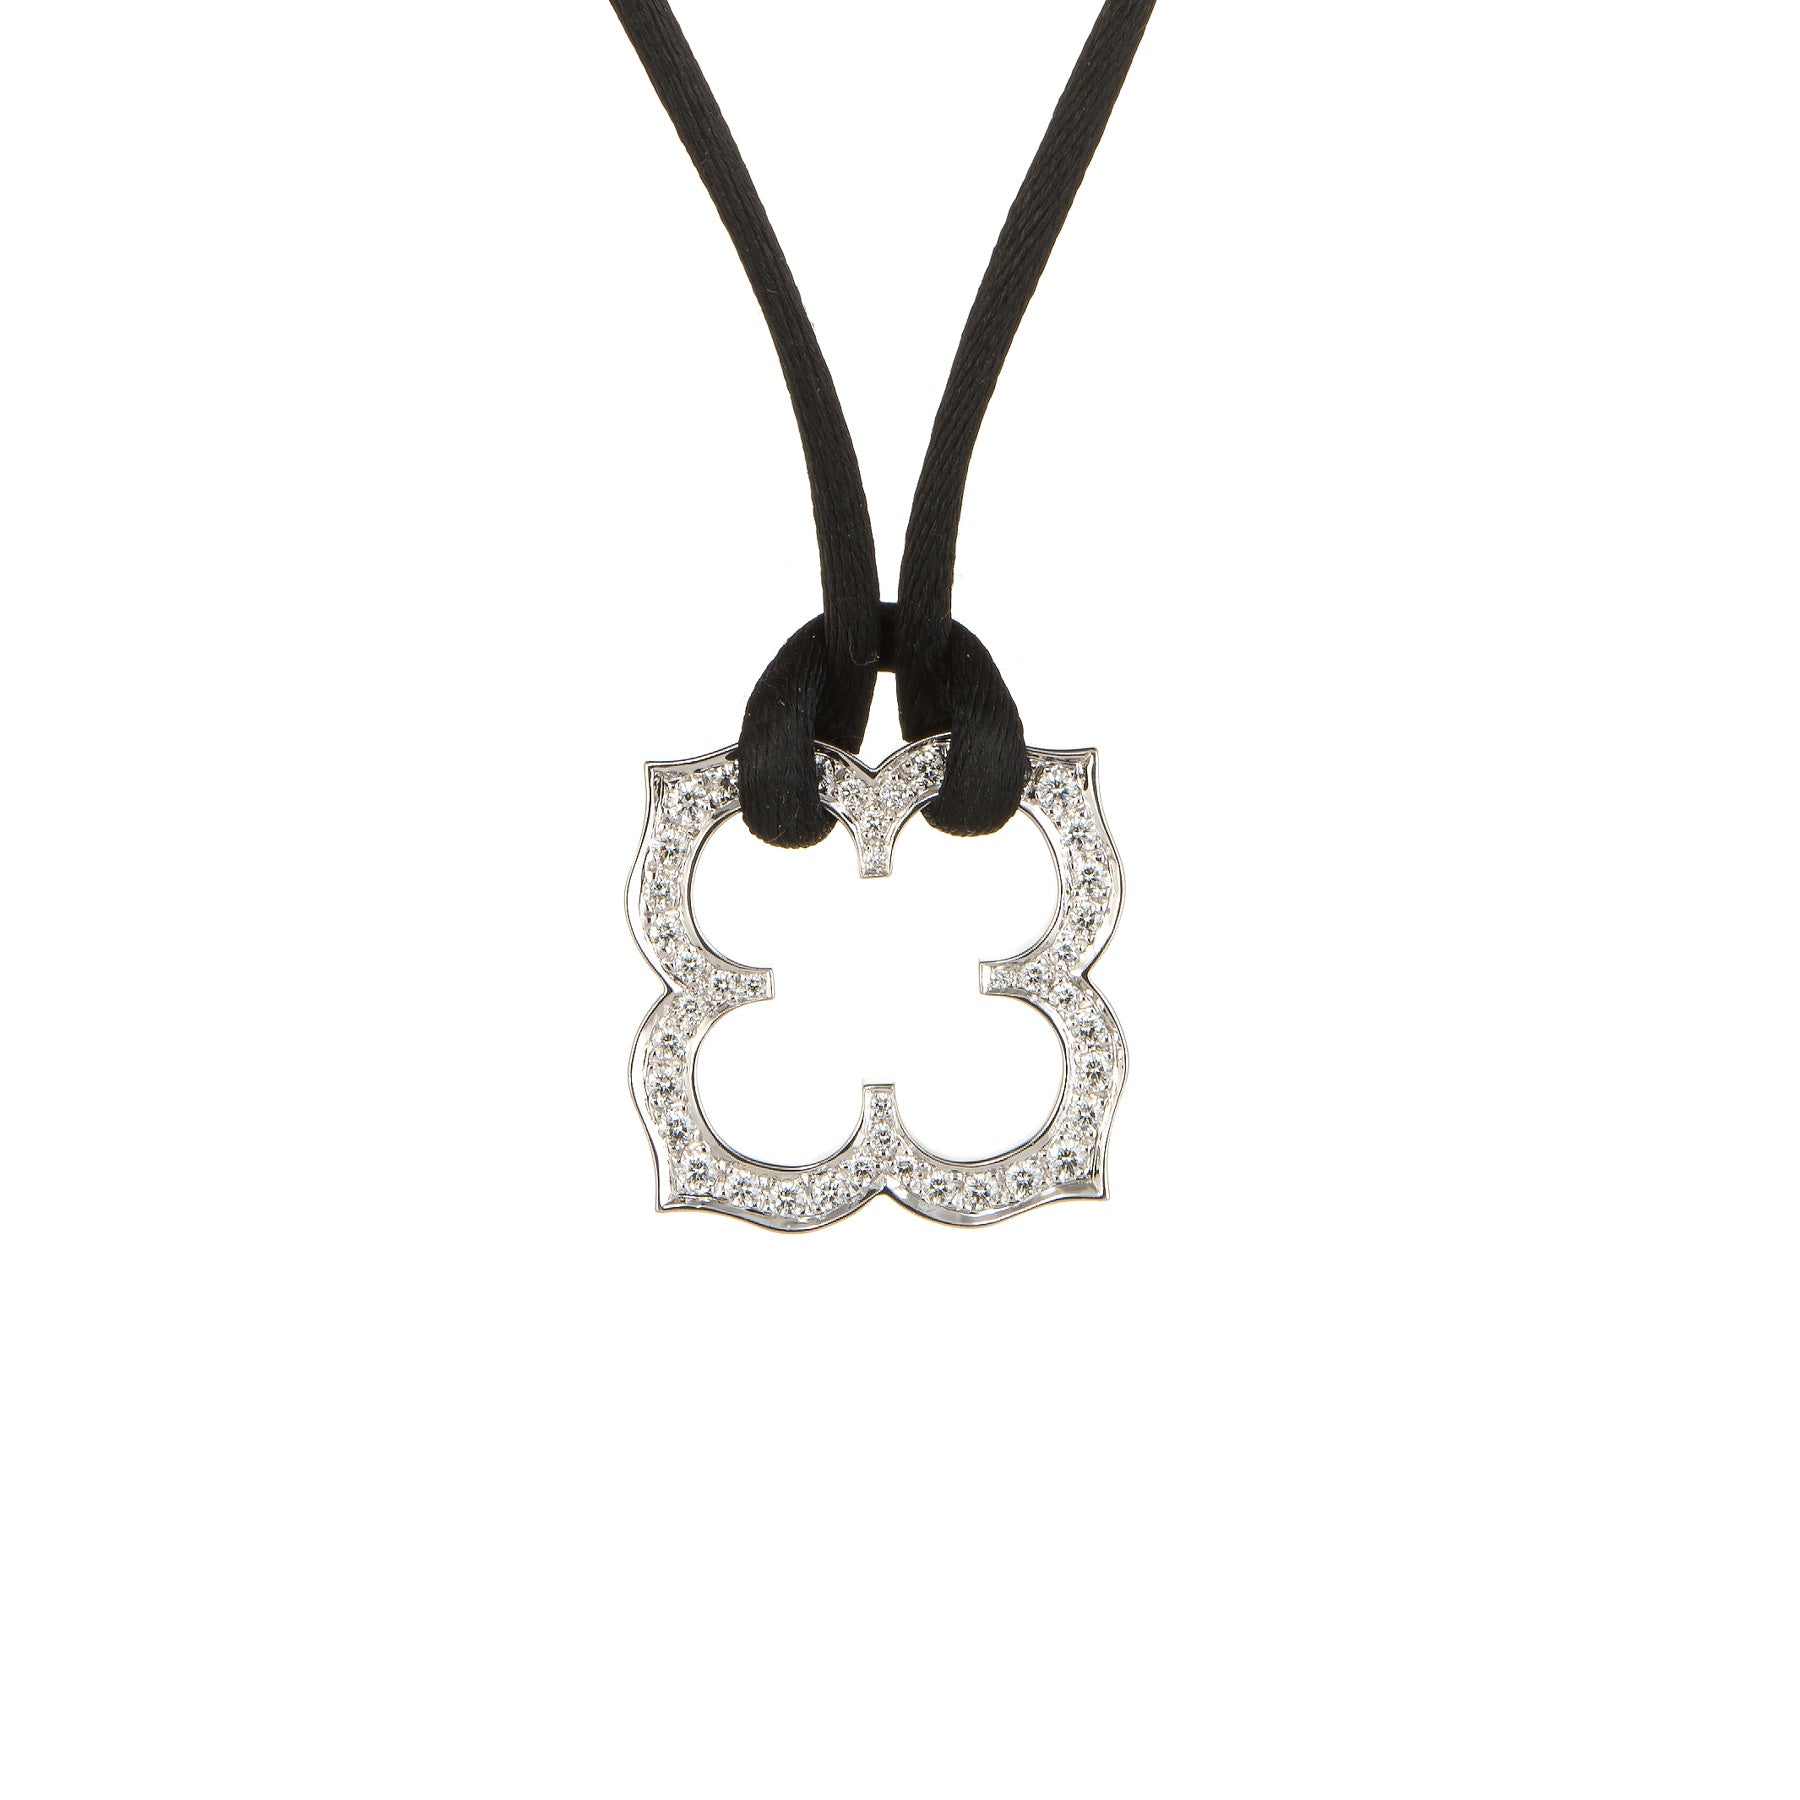 Diamond Clover Pendant Necklace in 18k White Gold by Hearts On Fire -  Nelson Coleman Jewelers